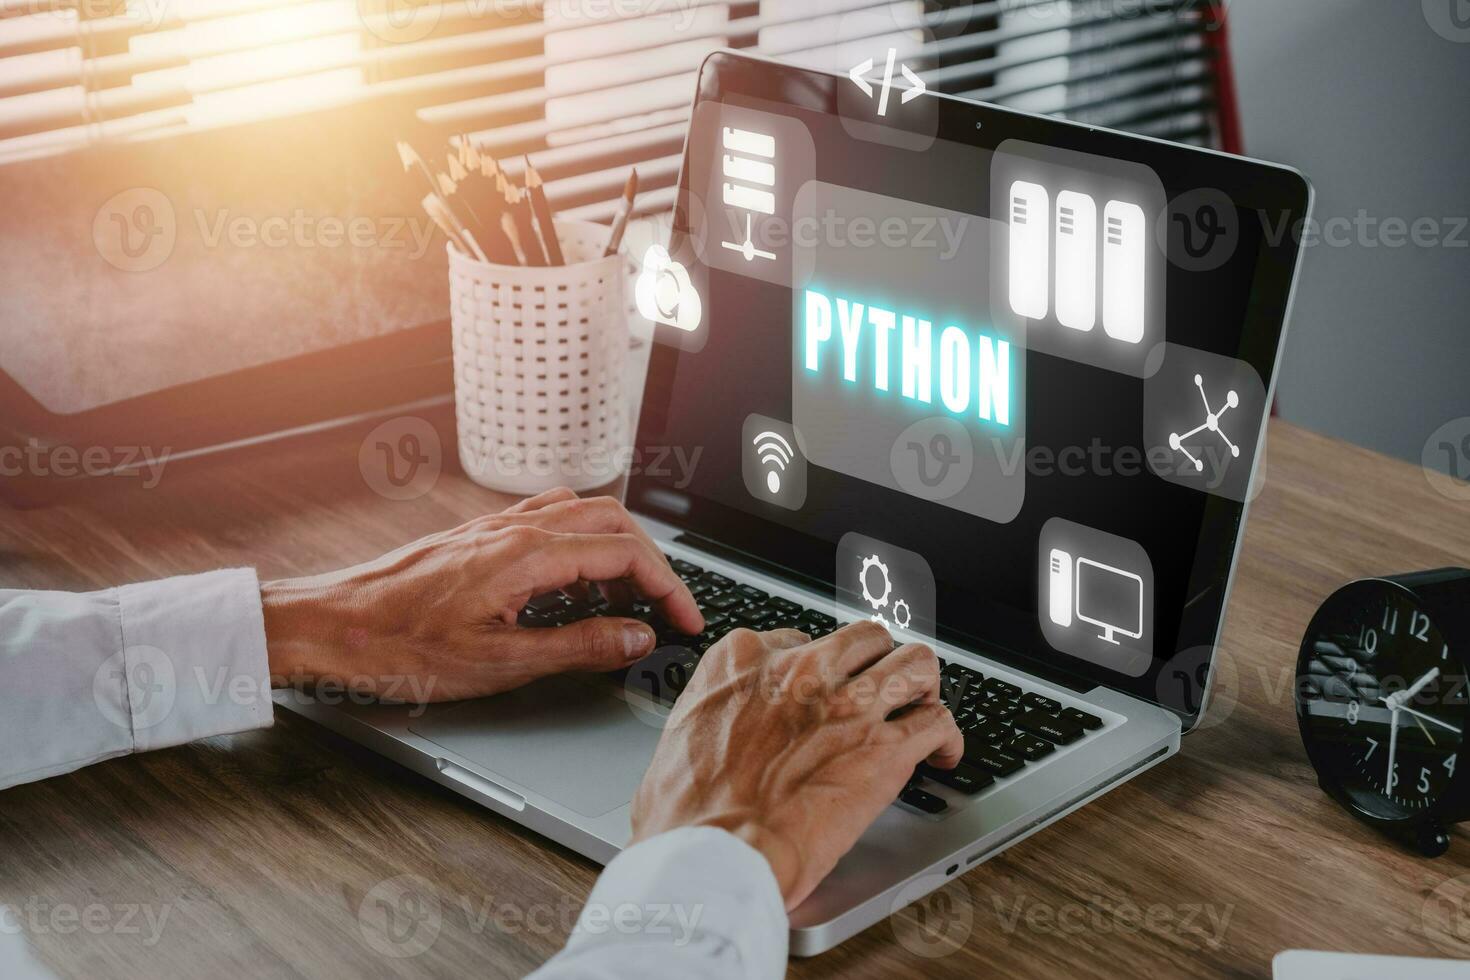 Python Programming Language, Woman hand typing keyboard with python programming icon on virtual screen, Application and web development concept. photo